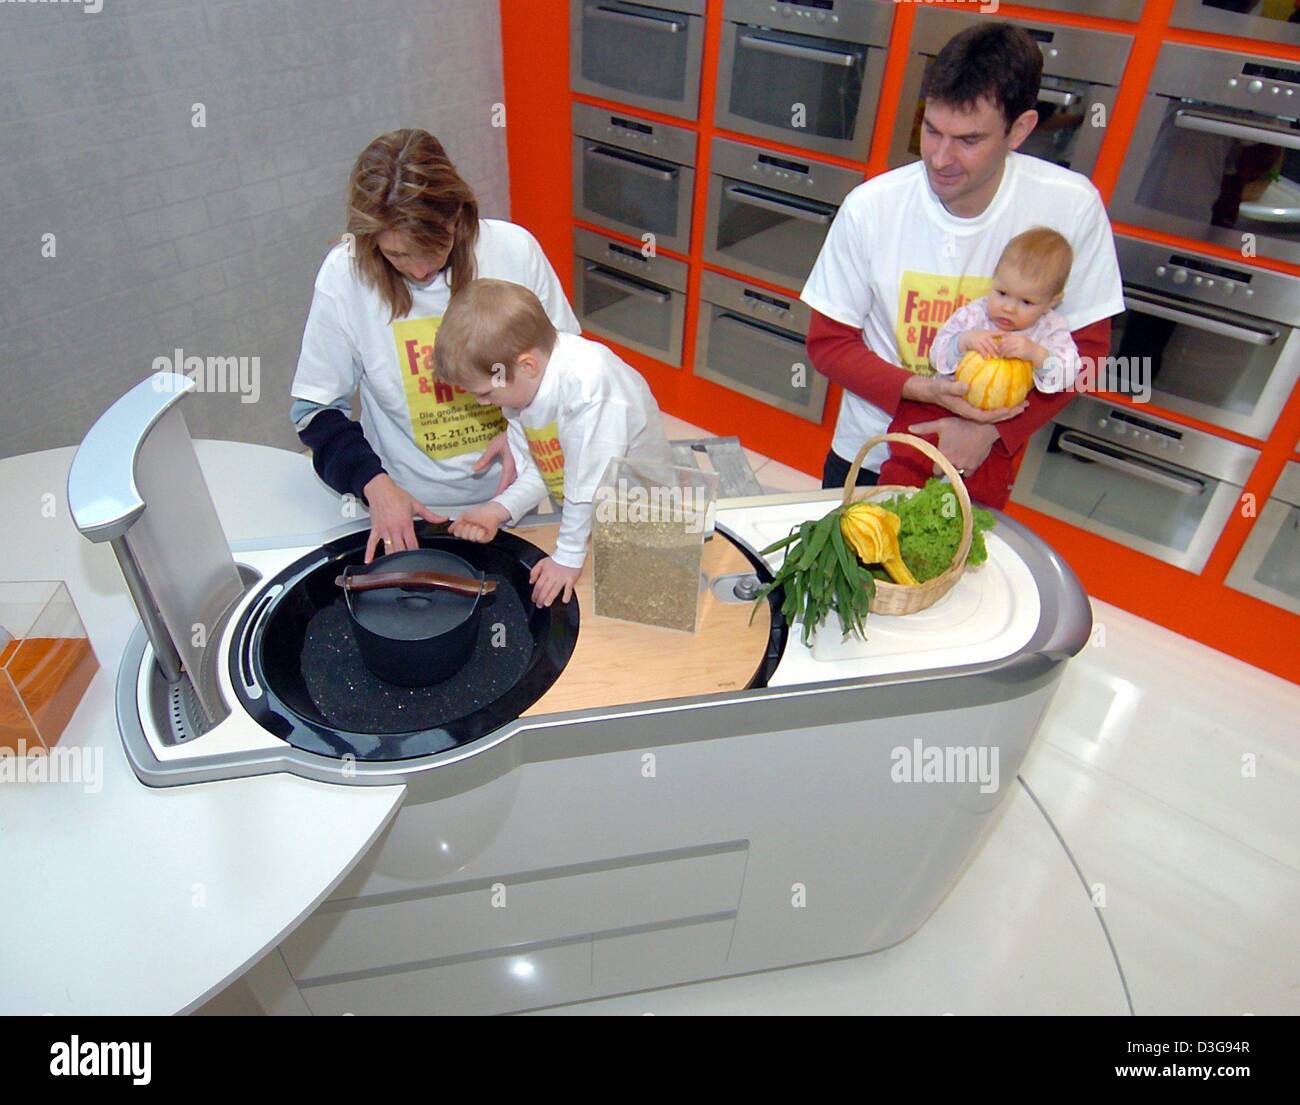 (dpa) - A family poses next to a design study of a kitchen by kitchen producer Bauknecht for photographers prior to the opening of the consumer fair 'family and home' at the fair premises in Stuttgart, Germany, 11 November 2004. The design study consists of a complete built-in kitchen with stove, sink, fume hood and compartments. The latest kitchen designs can be seen in Stuttgart  Stock Photo